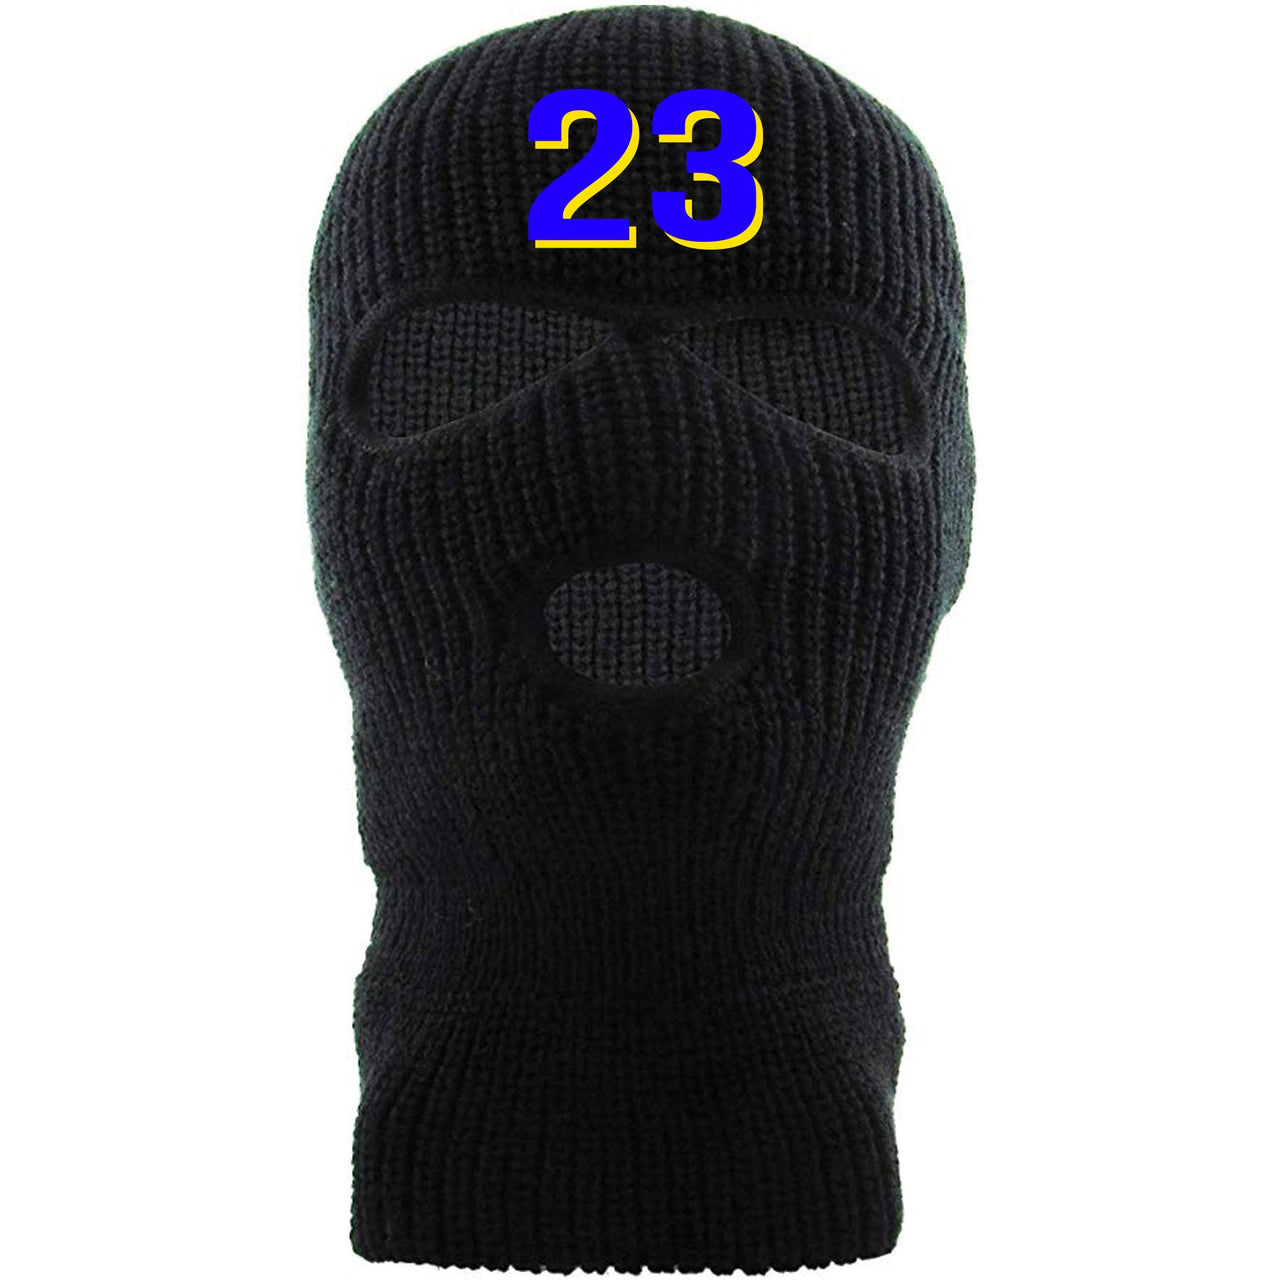 Embroidered on the forehead of the Jordan 5 Laney sneaker matching ski mask is the 23 logo embroidered in blue and yellow